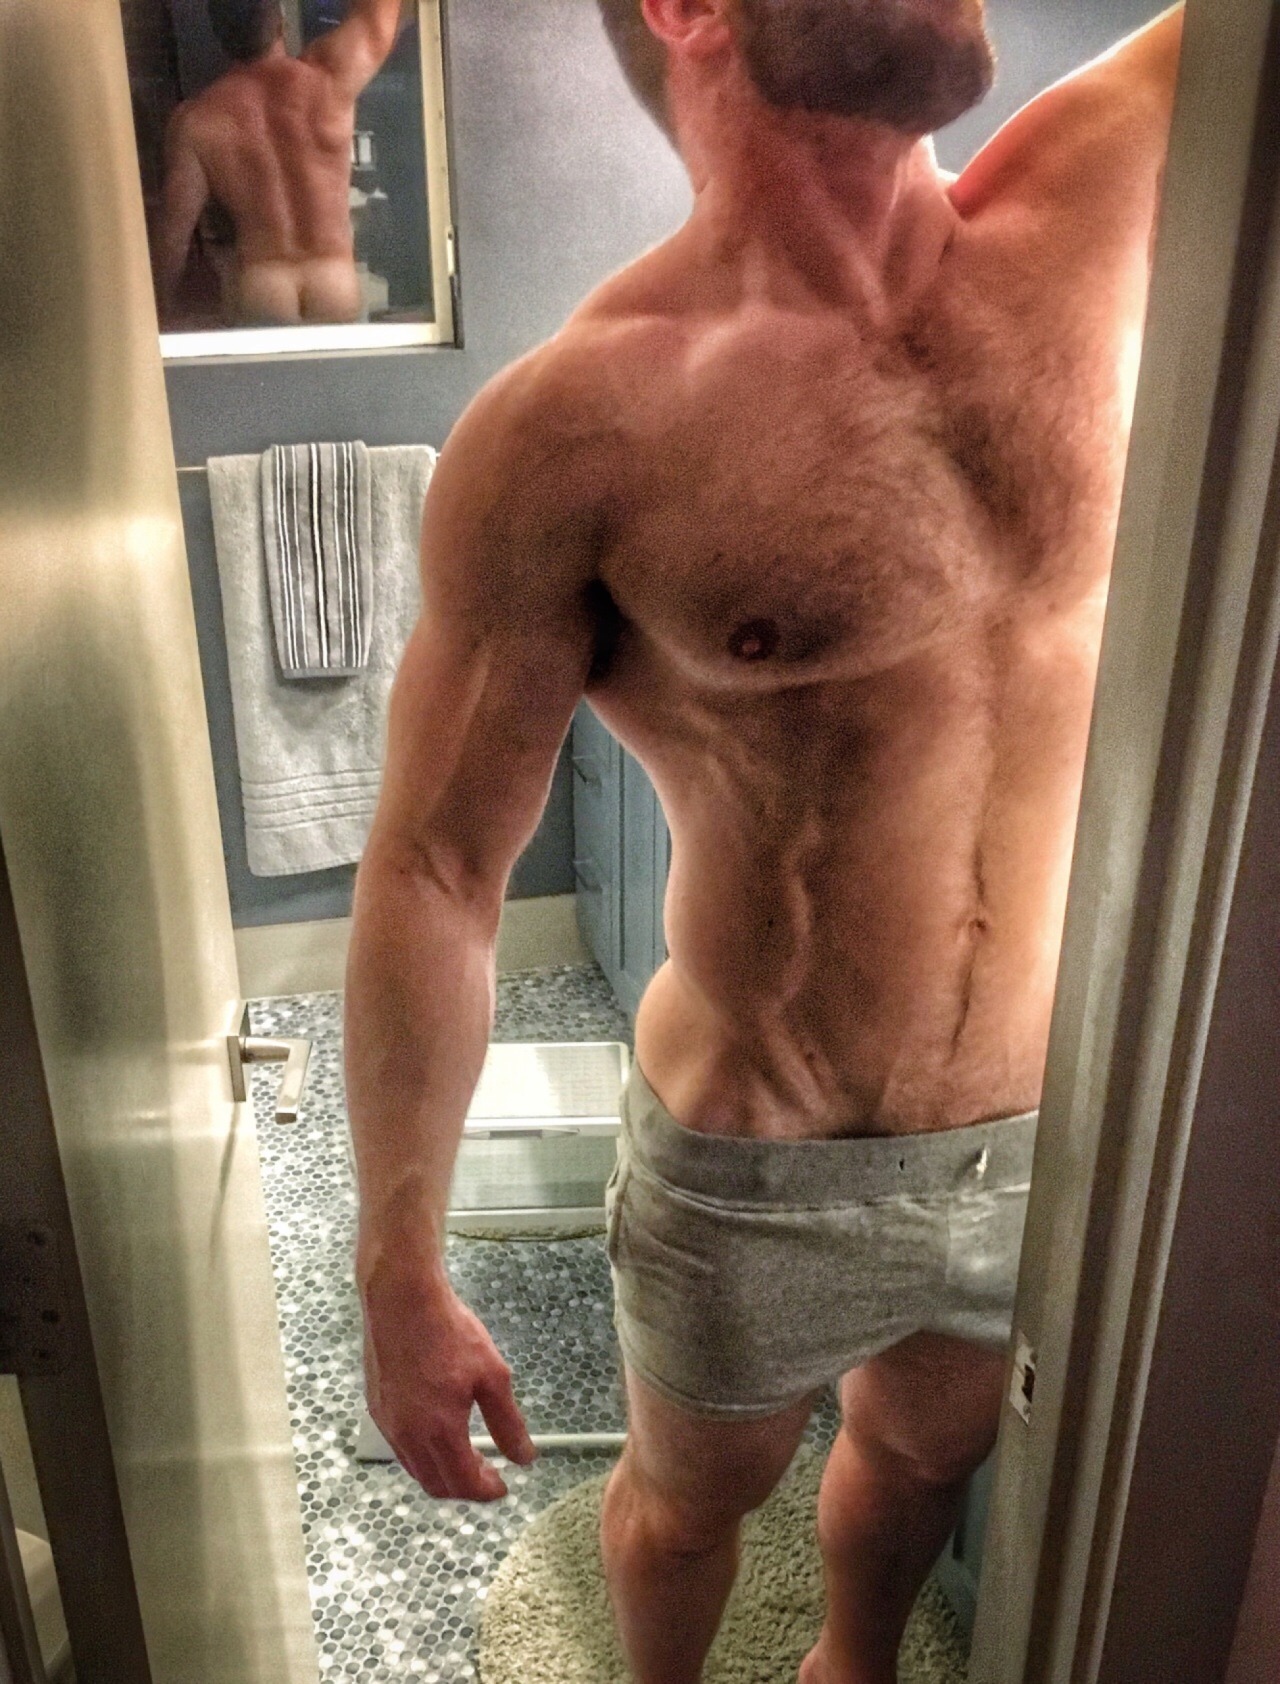 marriedjock8:  My brother-in-law came by to help me paint the bathroom while my wife